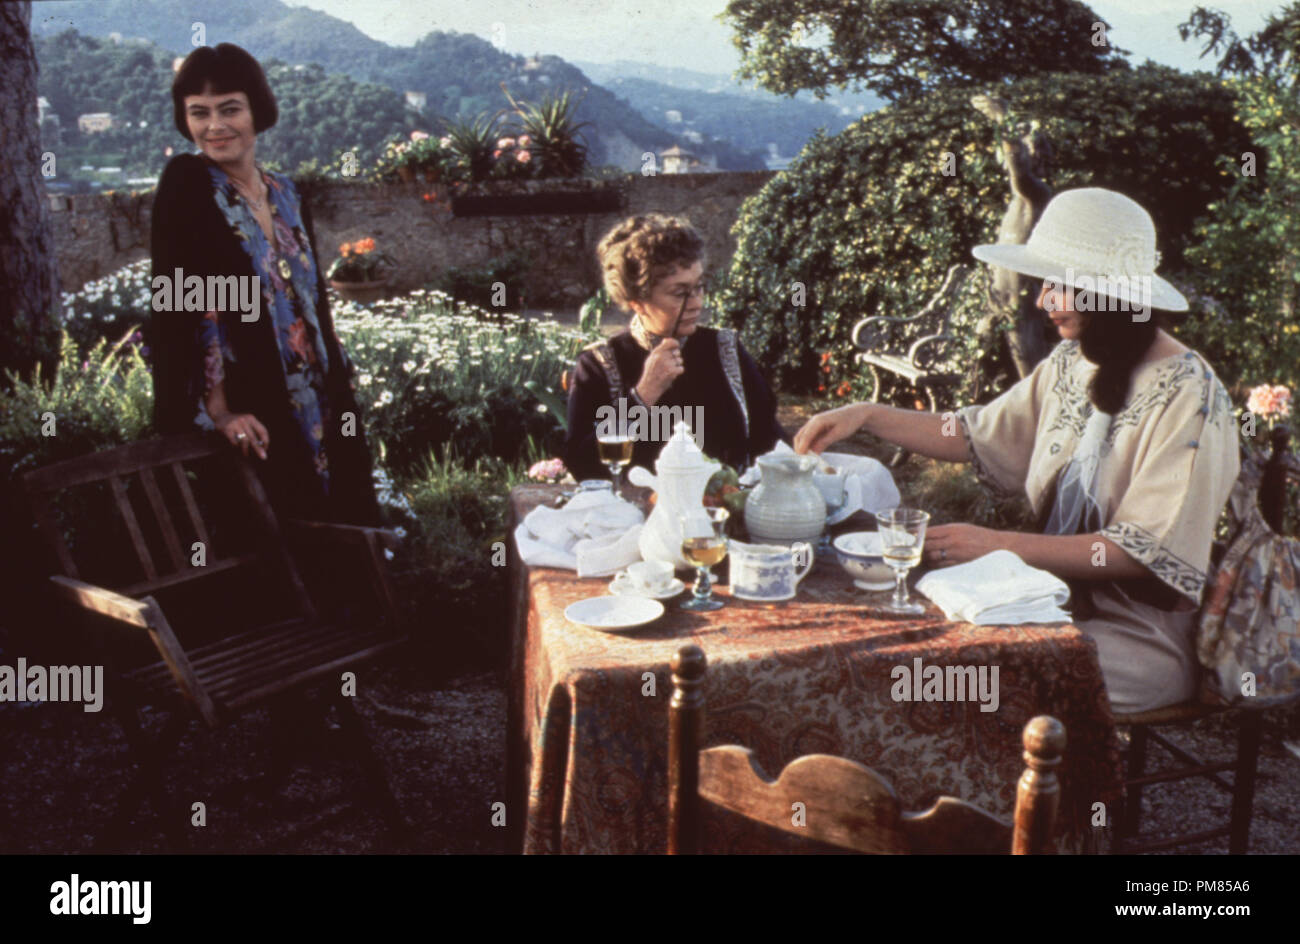 Film still or Publicity still from 'Enchanted April' Polly Walker, Joan Playwright and Josie Lawrence © 1992 Miramax All Rights Reserved   File Reference # 31487 075THA  For Editorial Use Only Stock Photo